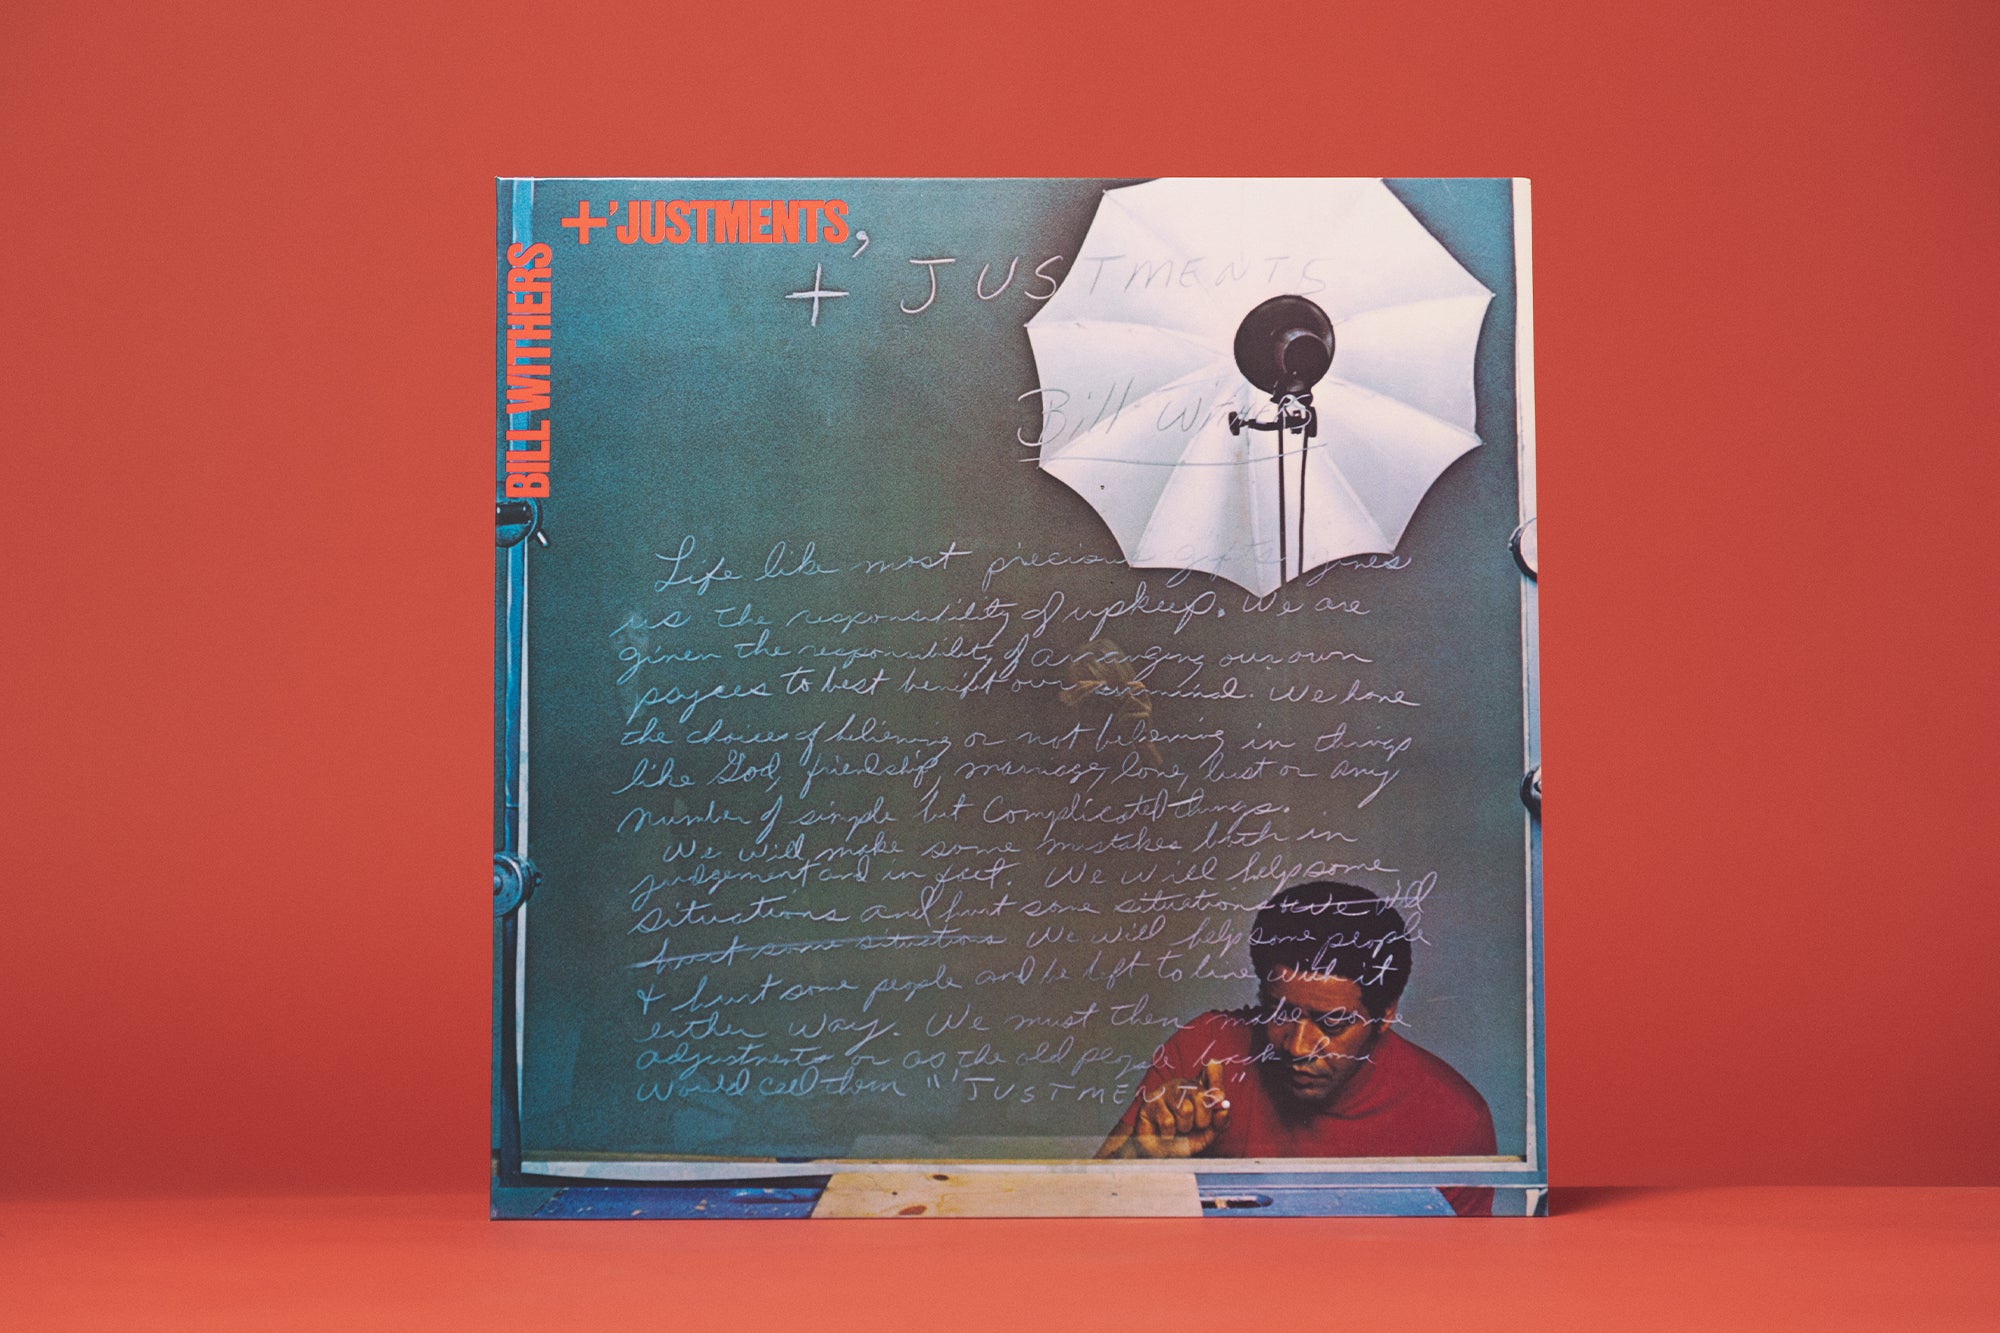 Bill Withers '+'Justments' - Vinyl Me, Please